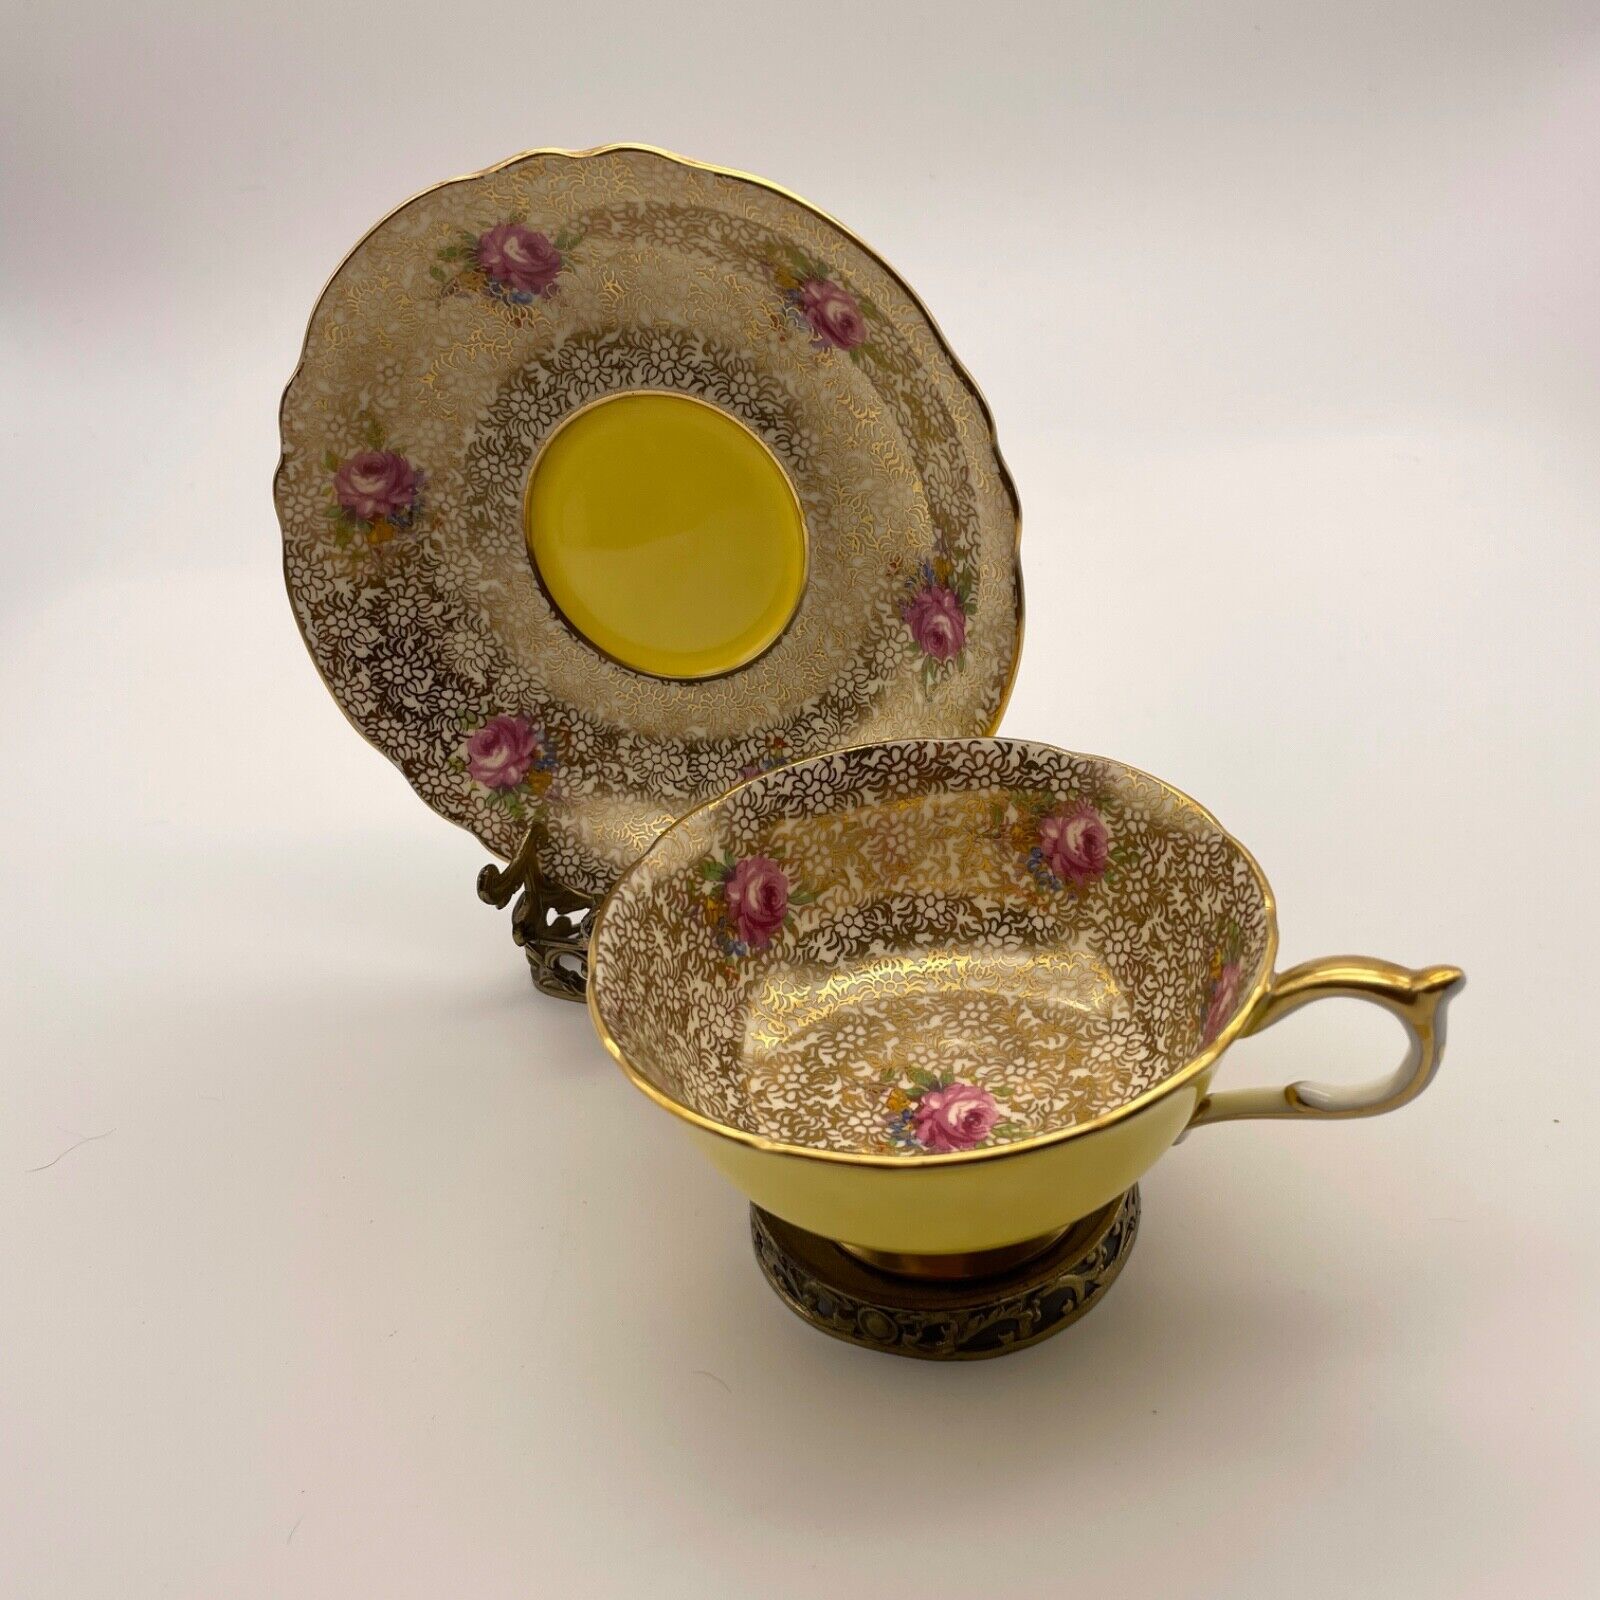 Paragon Tea Cup And Saucer Yellow Gold Chintz Pink Floral 7962/2 Dbl Warranted